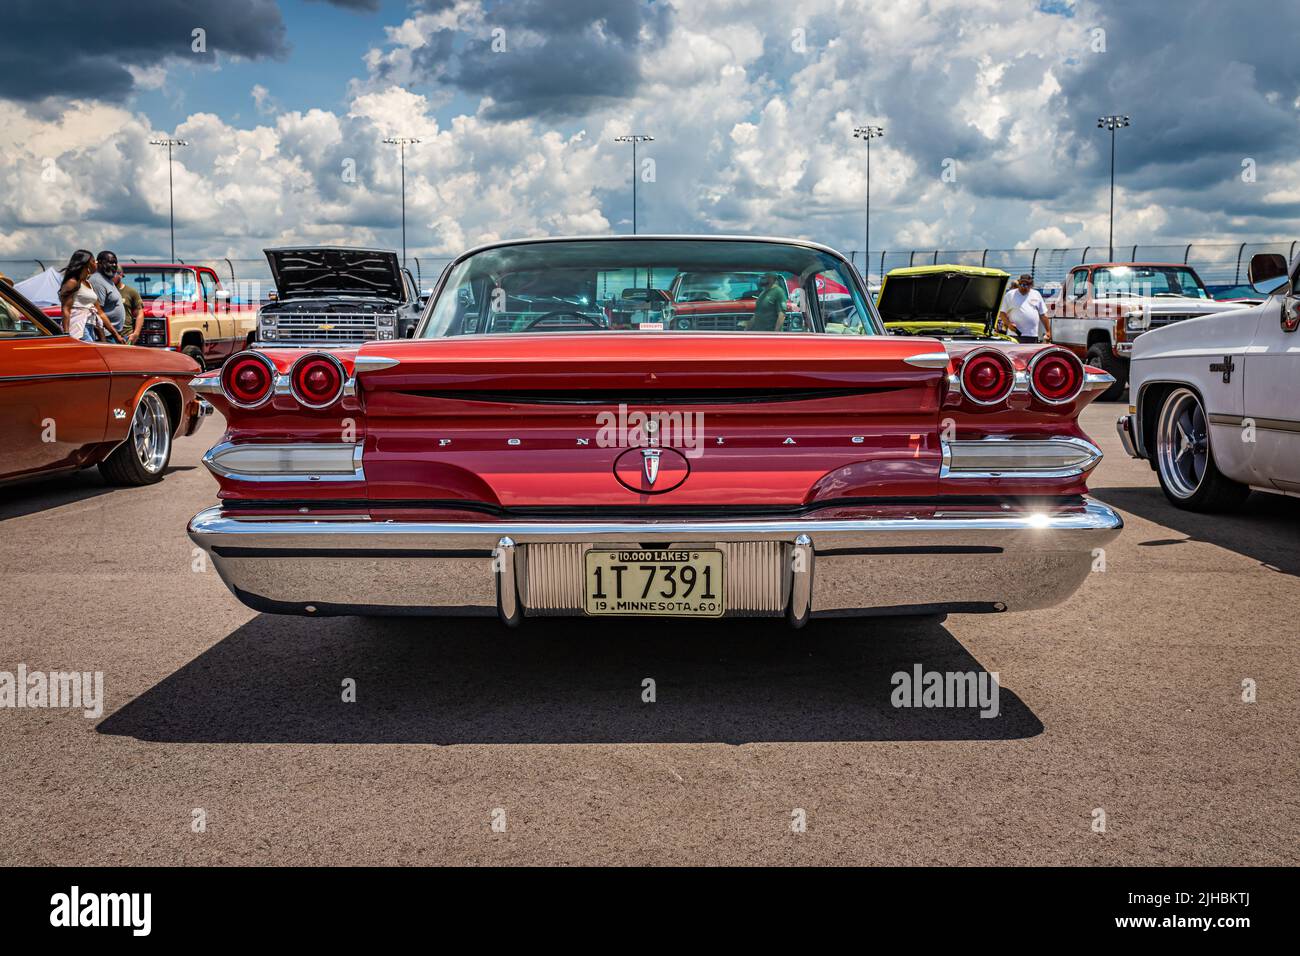 Lebanon, TN - May 14, 2022: Low perspective rear view of a 1960 Pontiac Parisienne Hardtop Coupe at a local car show. Stock Photo